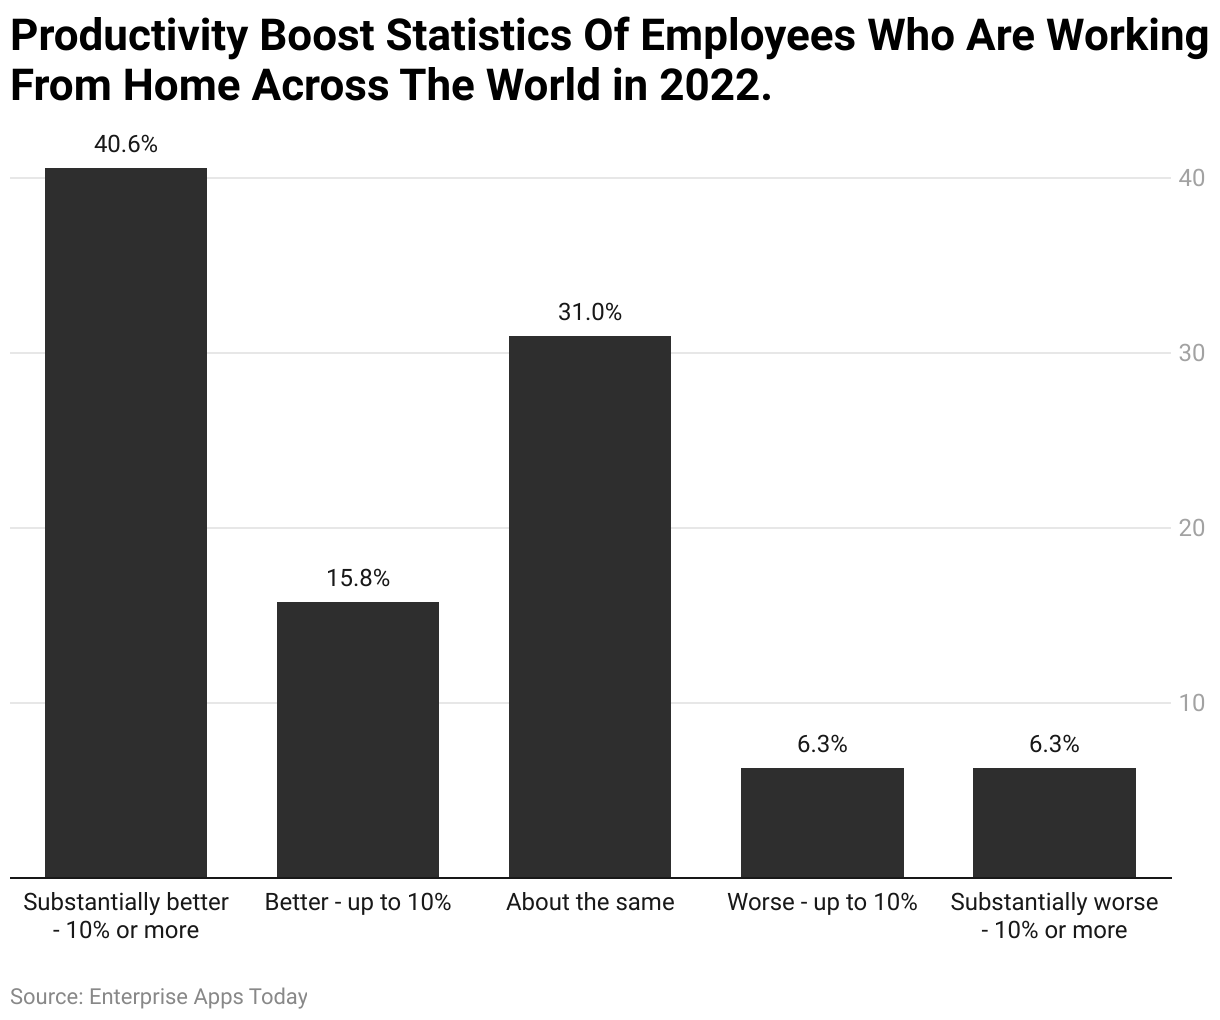 Productivity Boost Statistics Of Employees Who Are Working From Home Across The World in 2022. 